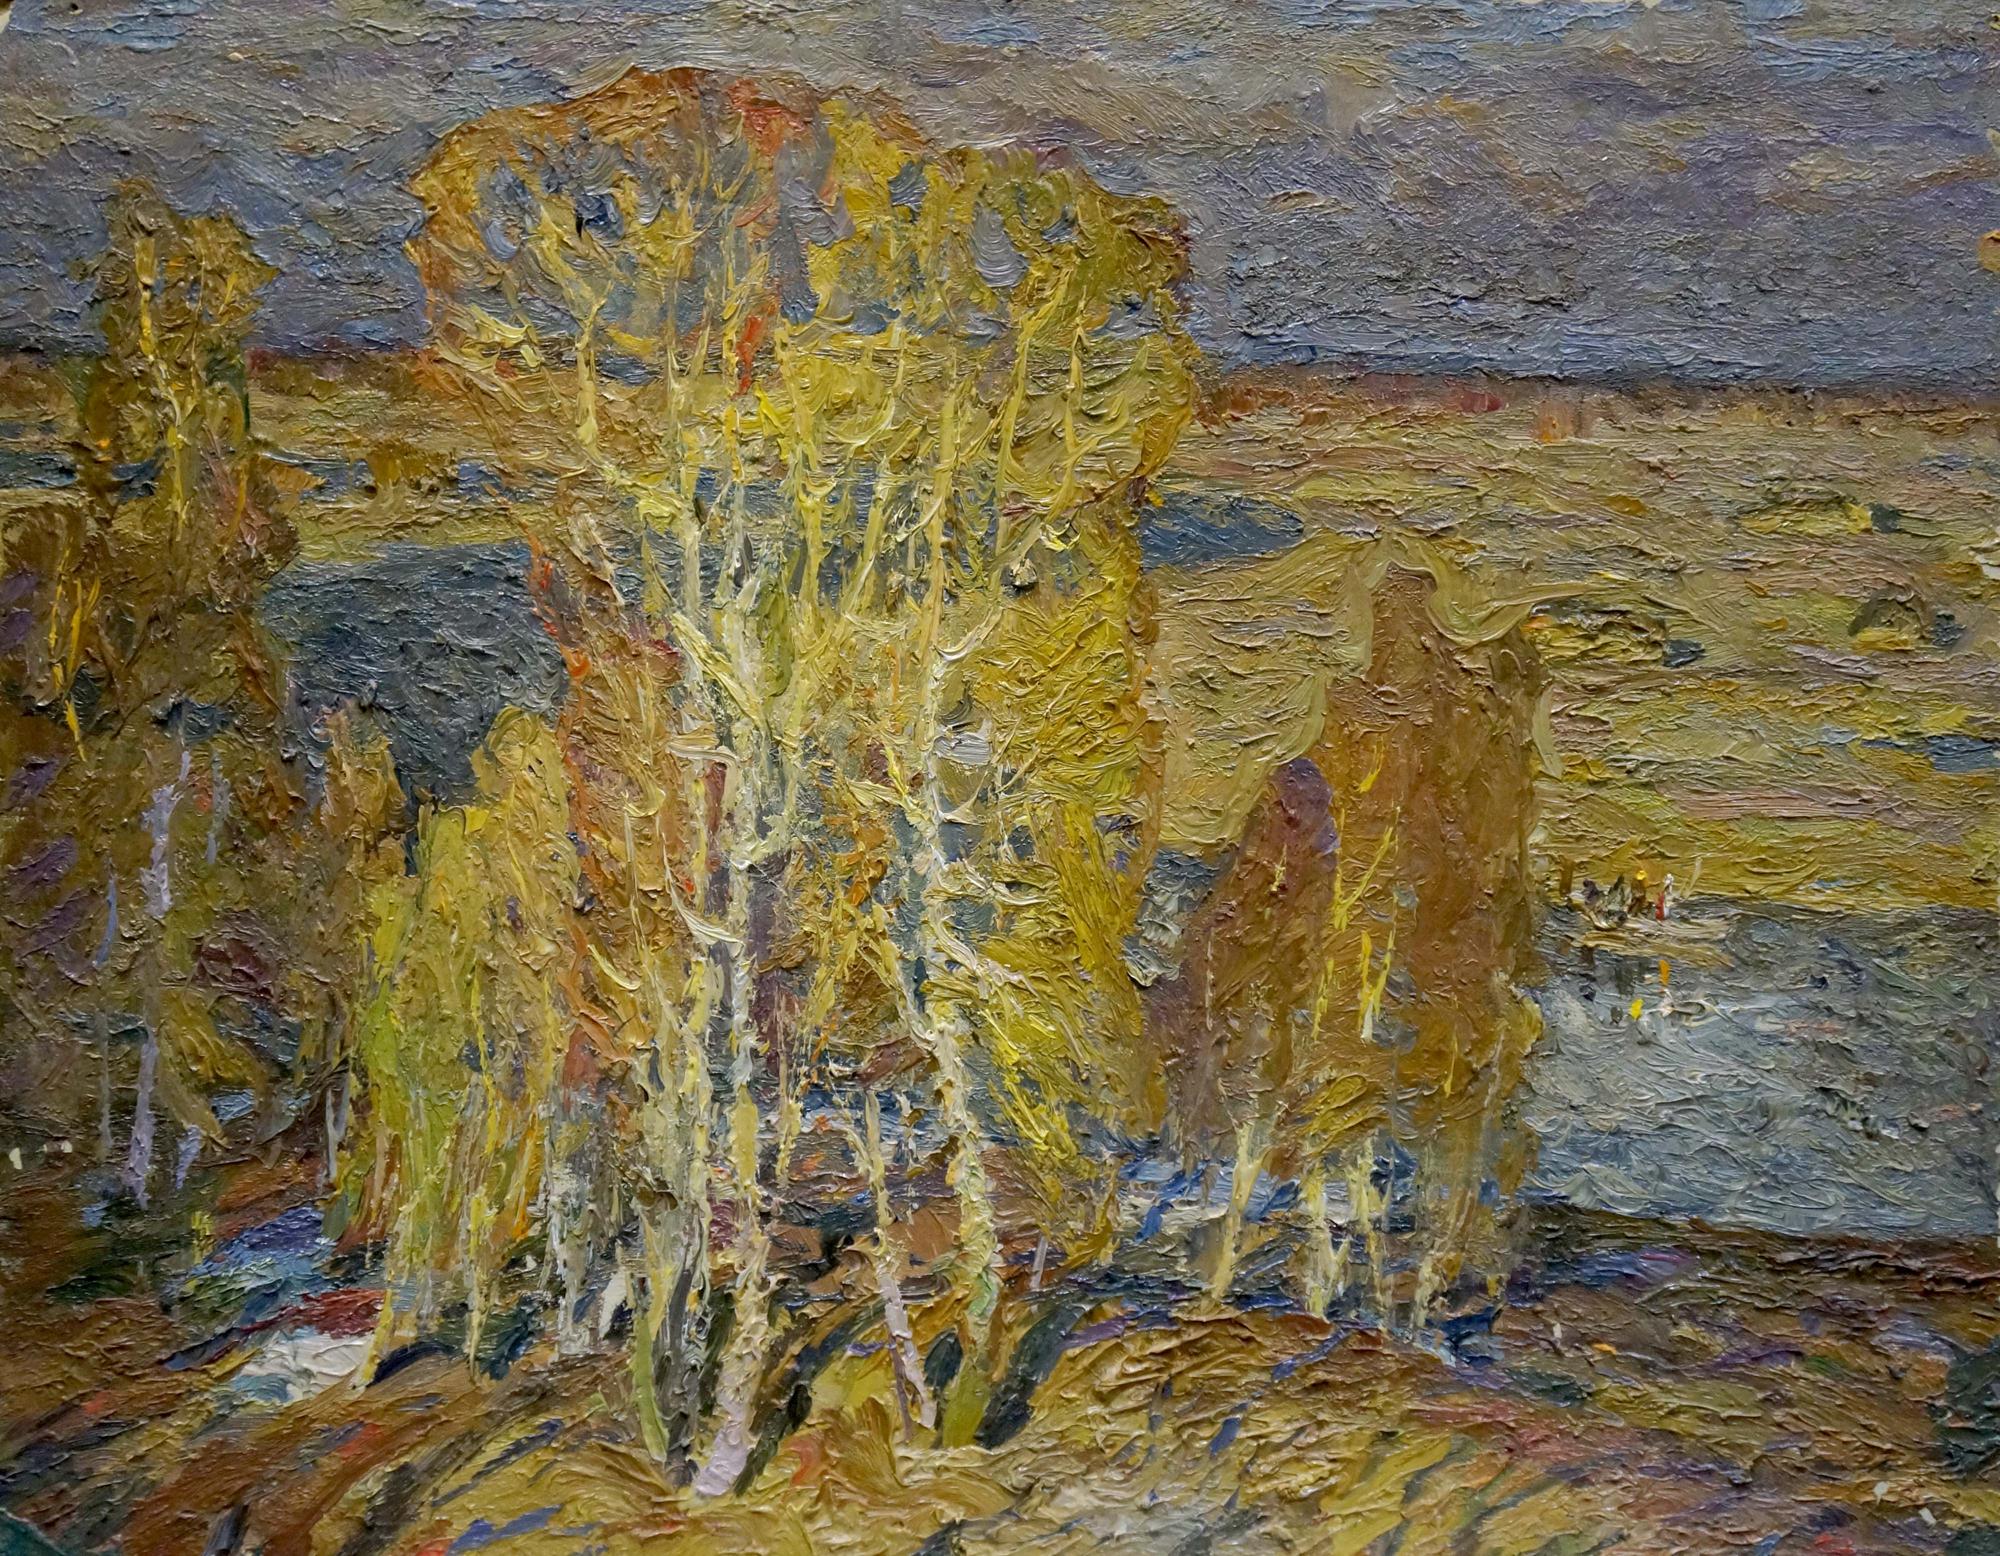 Oil painting Autumn forest by the river Grigory Ruban